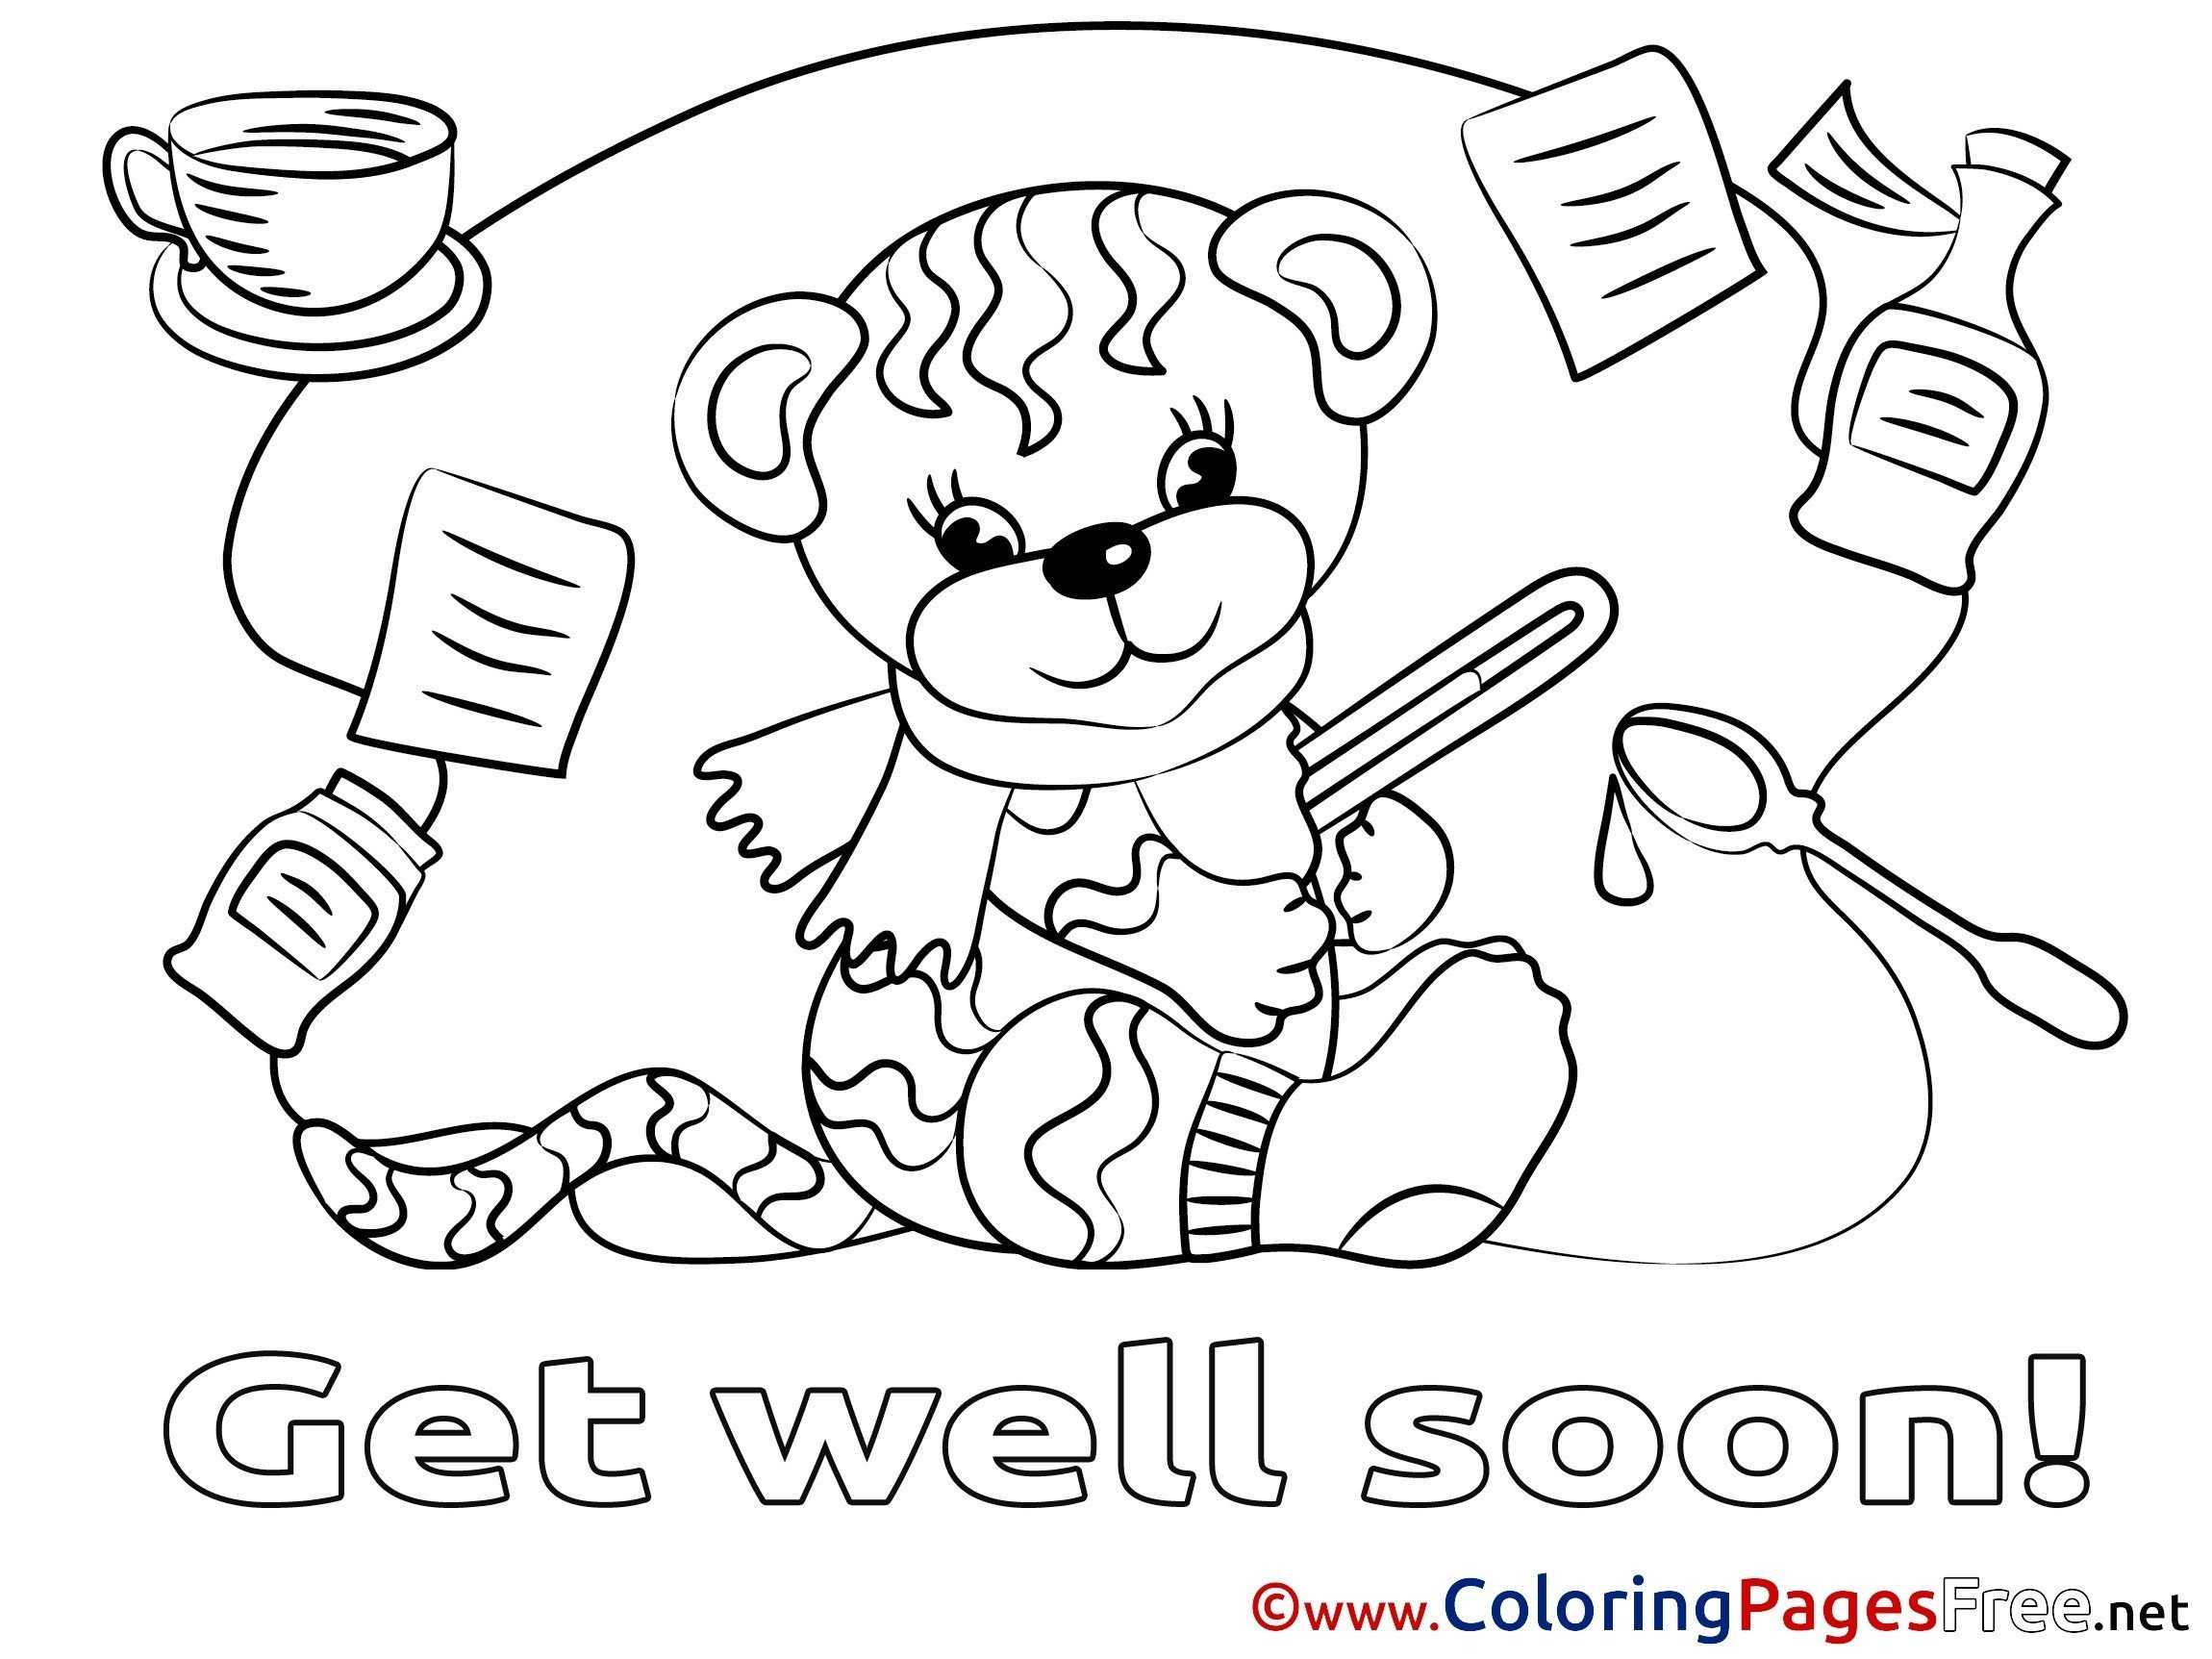 Get Well Soon Coloring Pages Unique Free 57 Get Well Card In Get Well Card Template